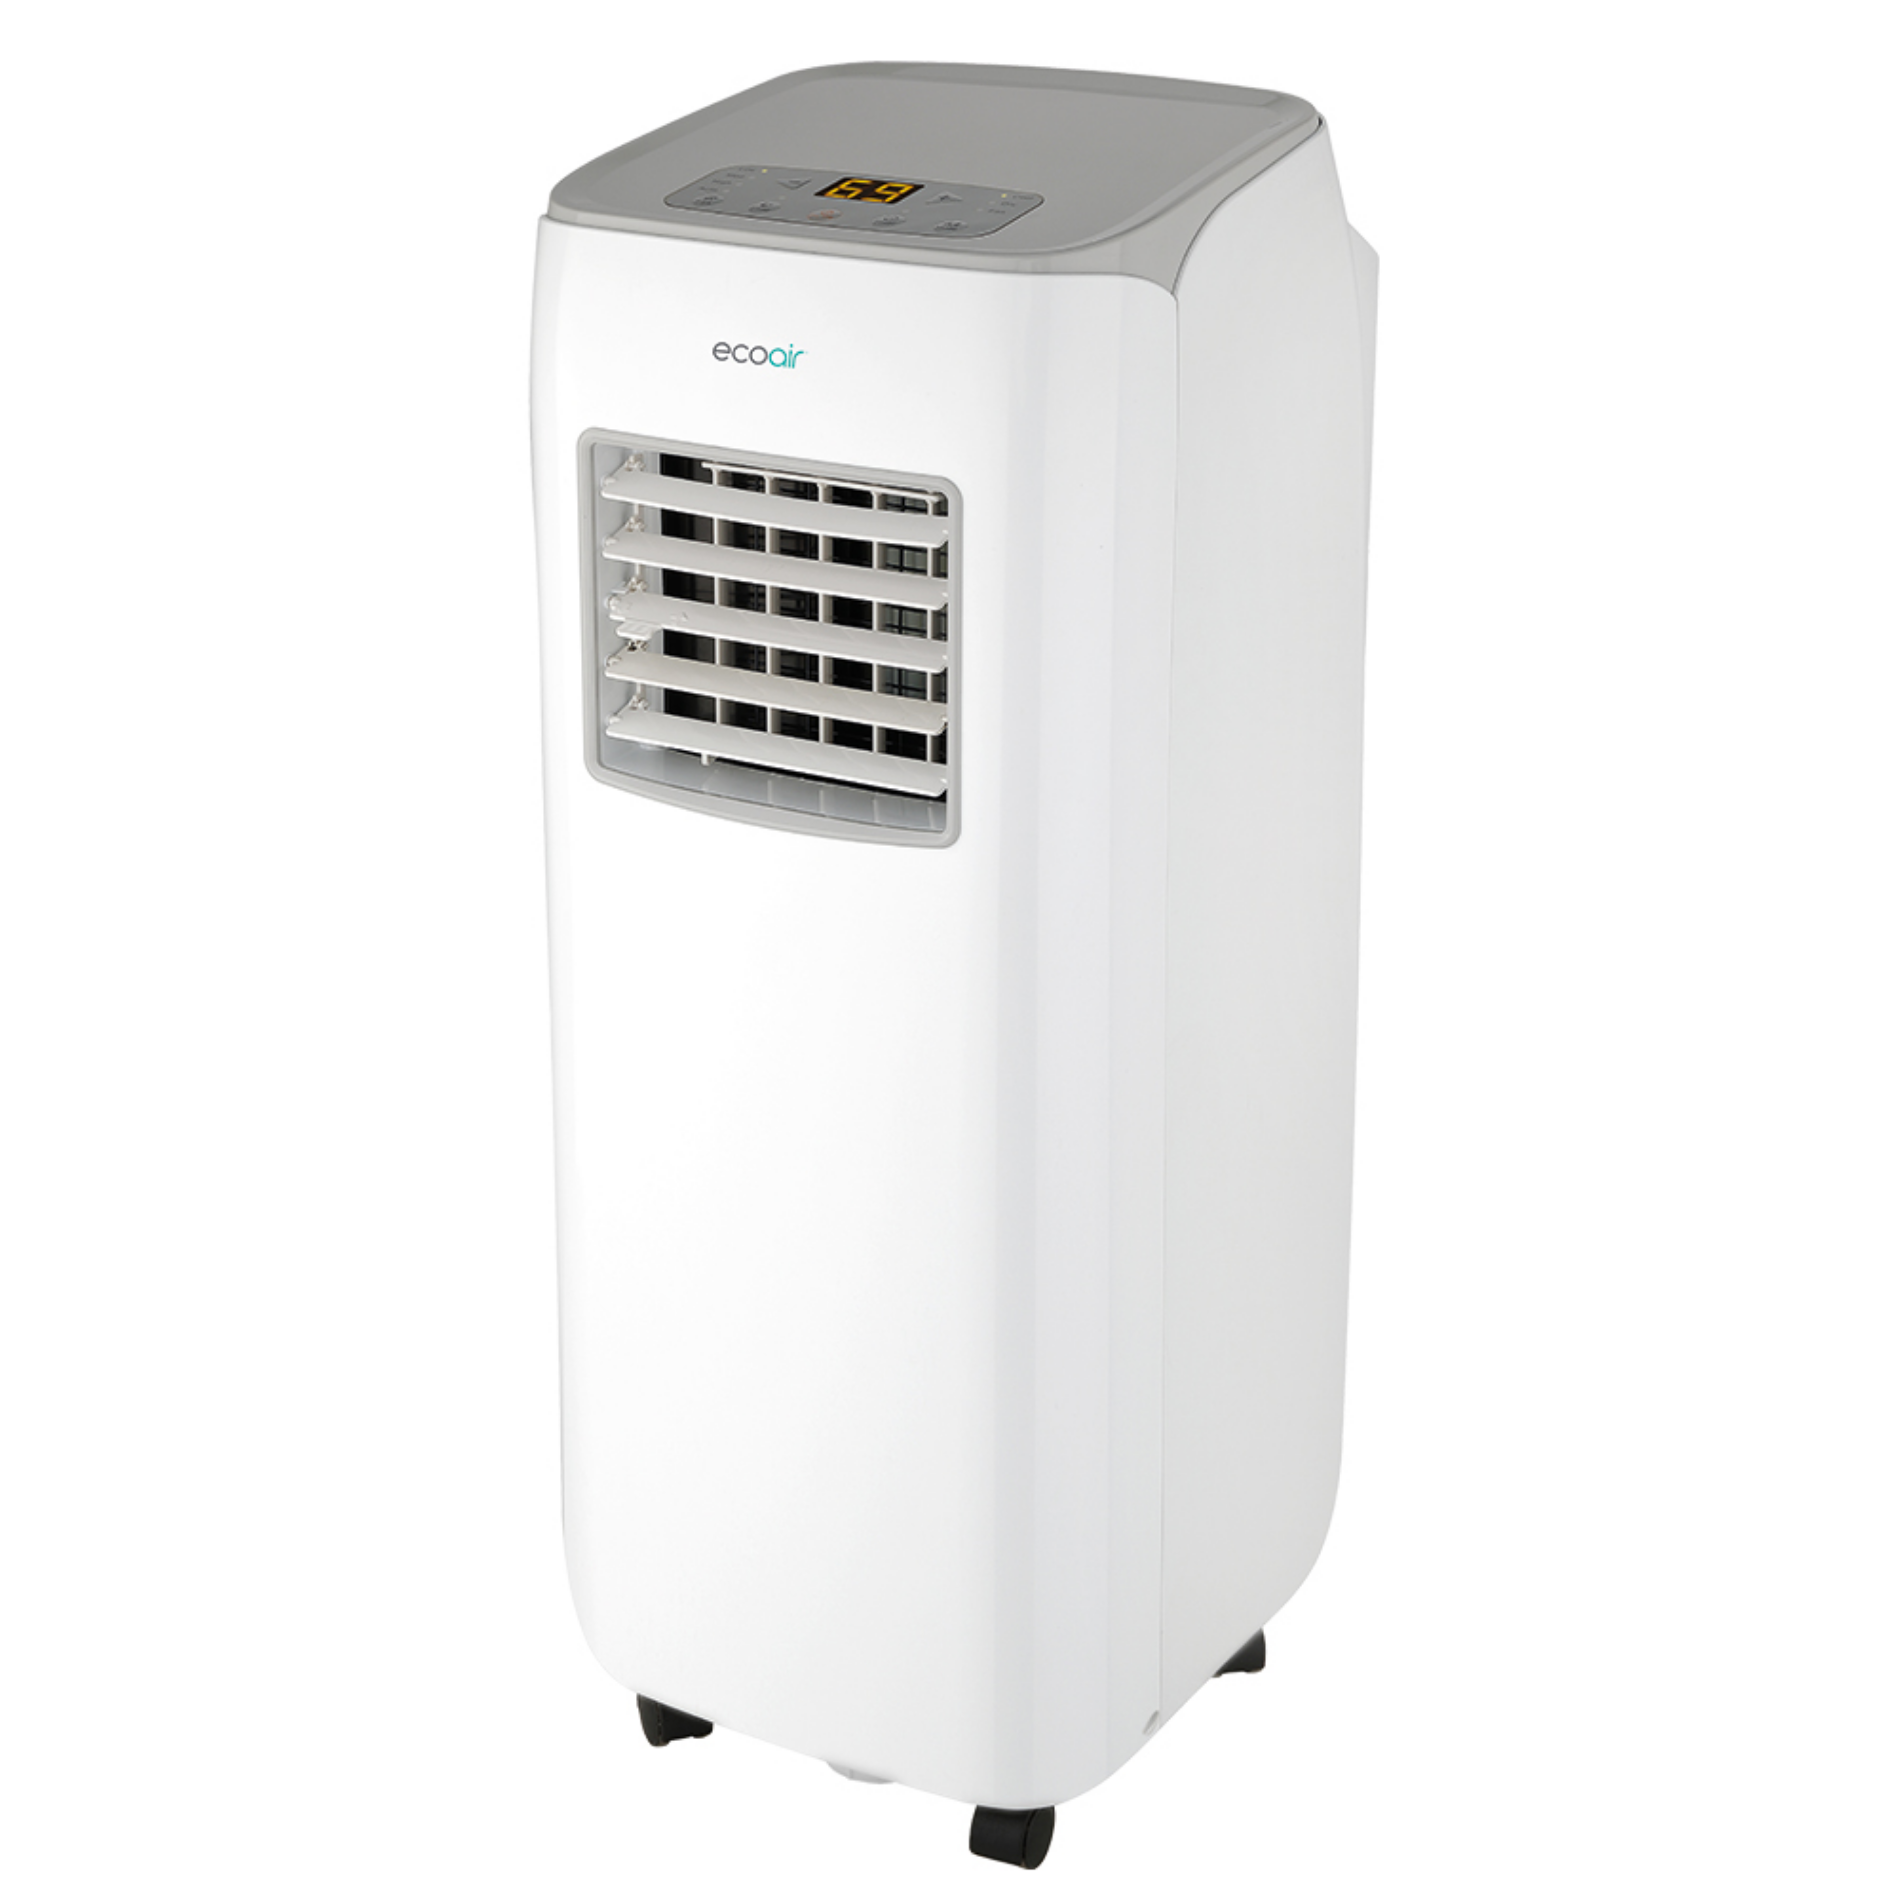 Eco Air Crystal R32 2.8kW Portable Air Conditioning Unit side